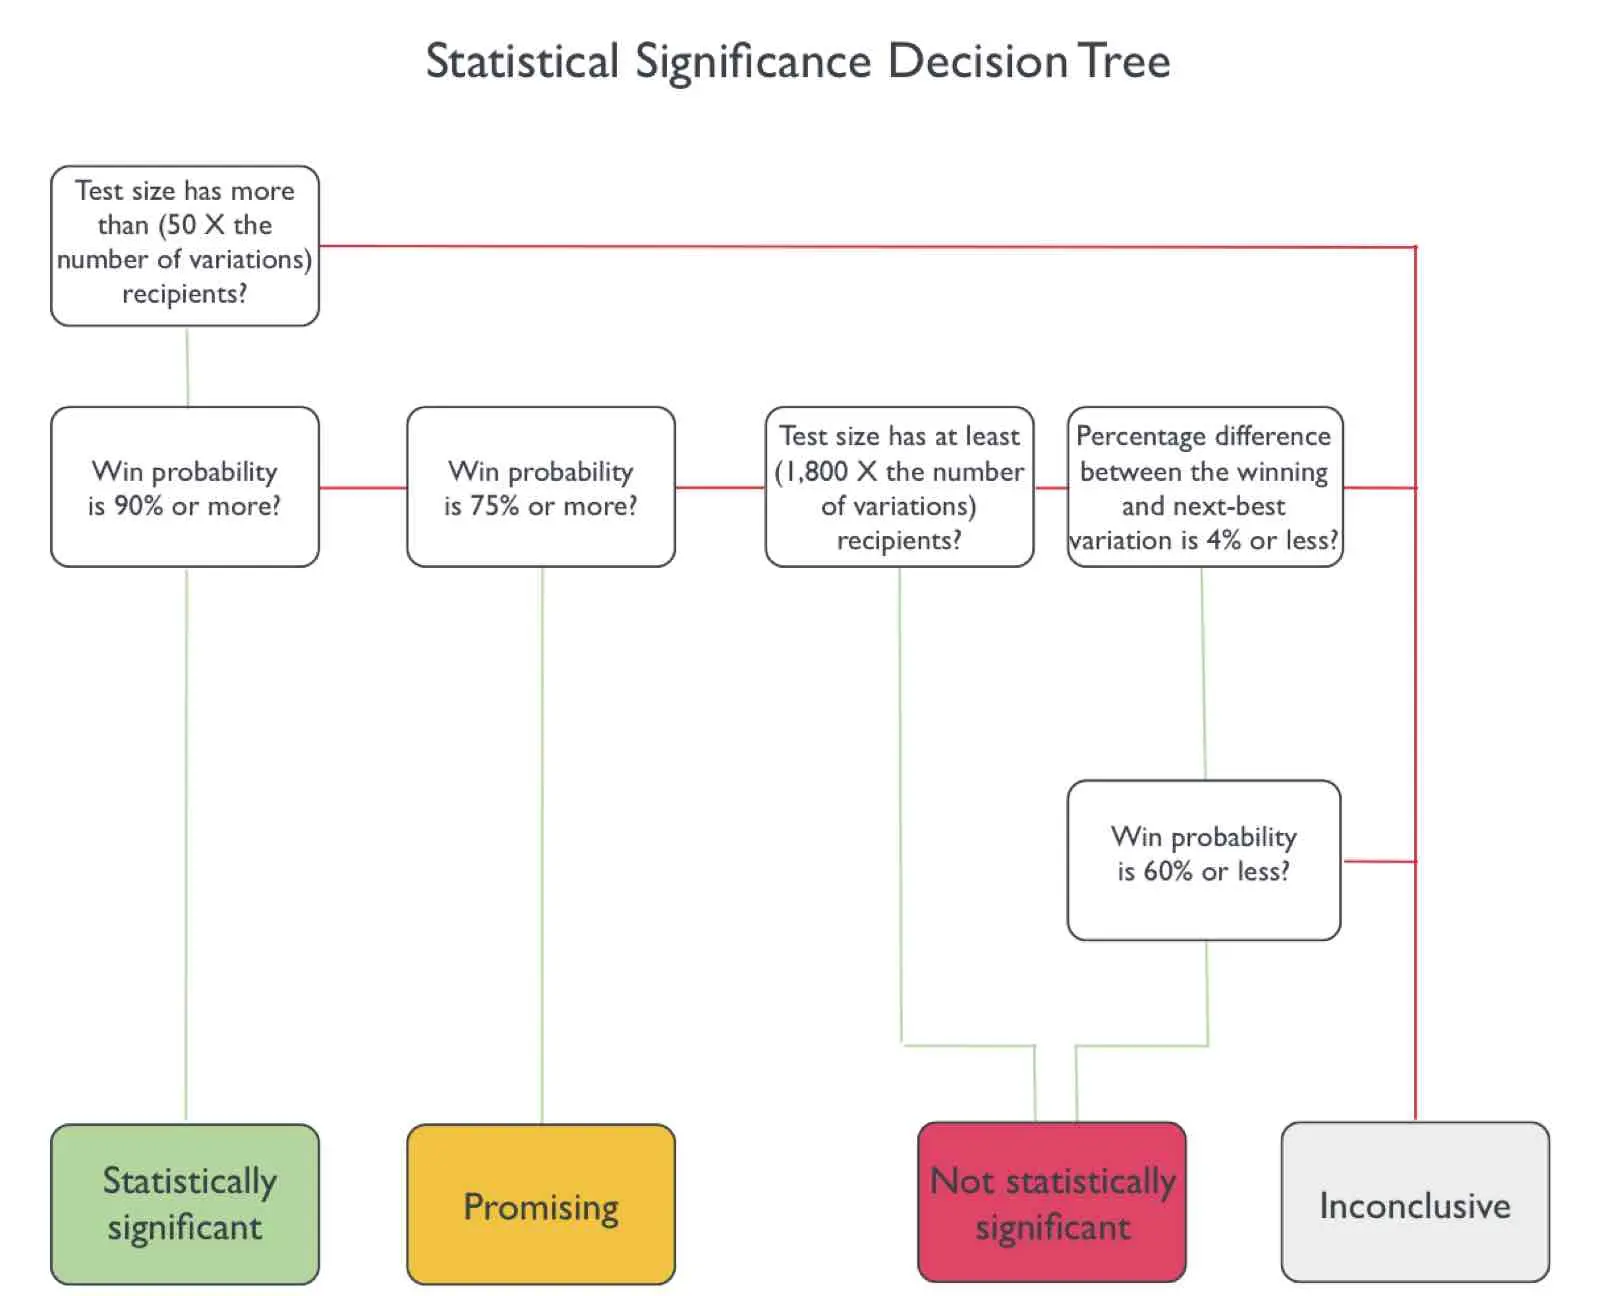 Image shows a decision tree for determining whether an A/B test is statistically significant. To be statistically significant, the win probability must be 90% or more. To be promising, it must be 75% or more. If the test achieves neither probability and the test size has at least 1800 x the number of variations of recipients, it’s not statistically significant. If the percentage difference between the winning and next-best variation is 4% or less, and the win probability is 60% or less, it’s not statistically significant. Otherwise, the test is inconclusive.